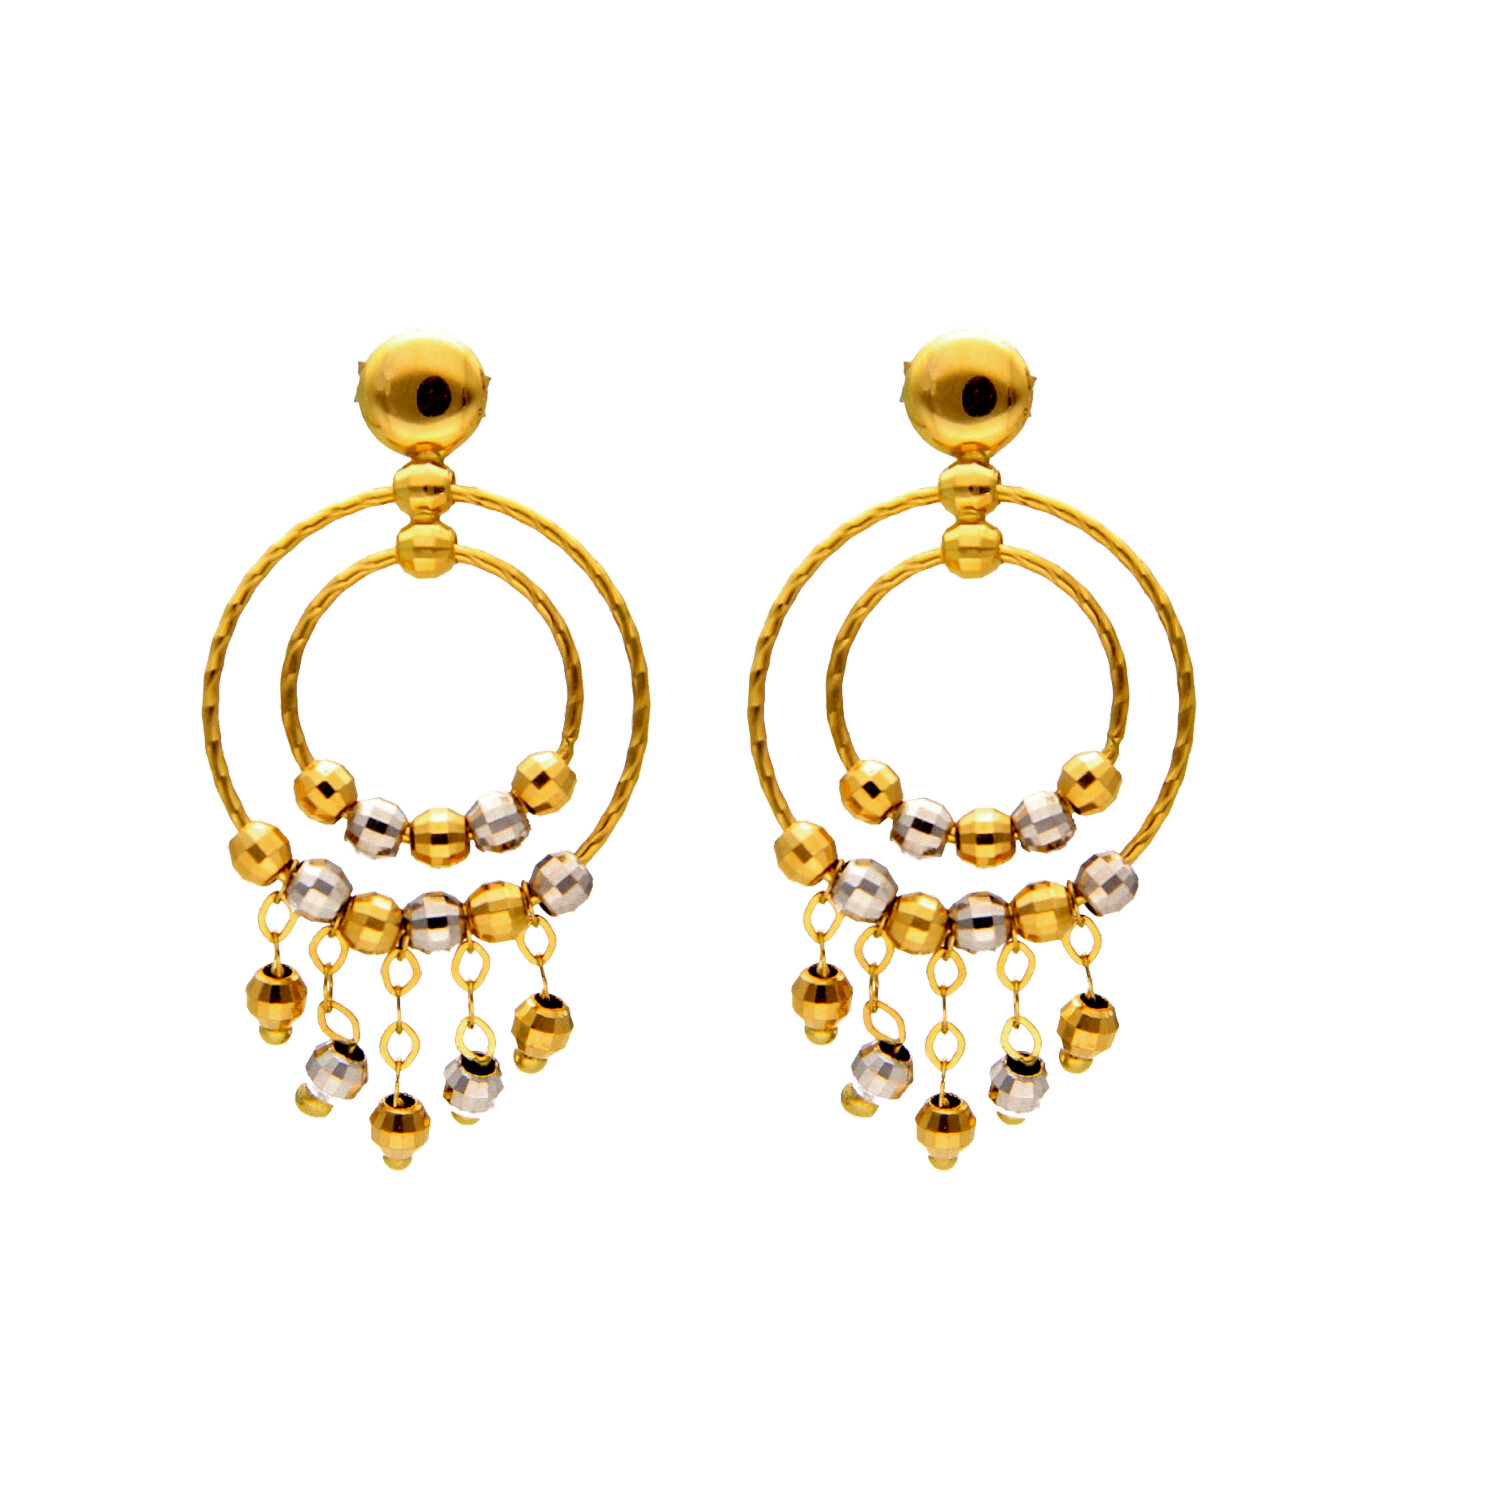 Yellow and white gold earrings